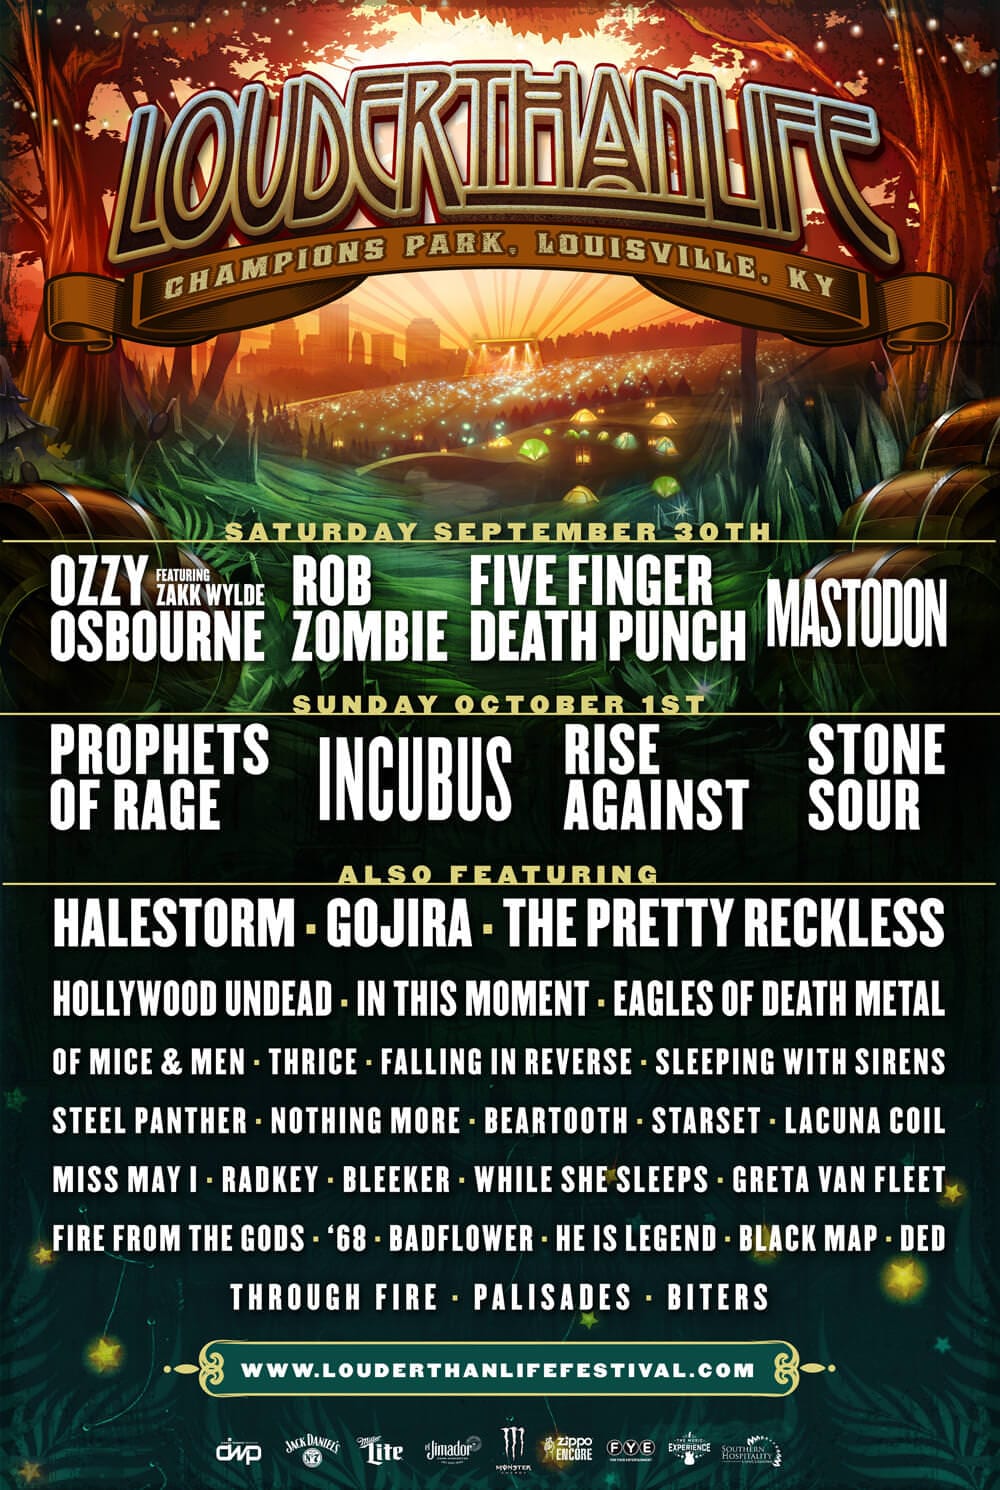 [US NEWS] LOUDER THAN LIFE Festival LineUp with Ozzy & Zakk for the